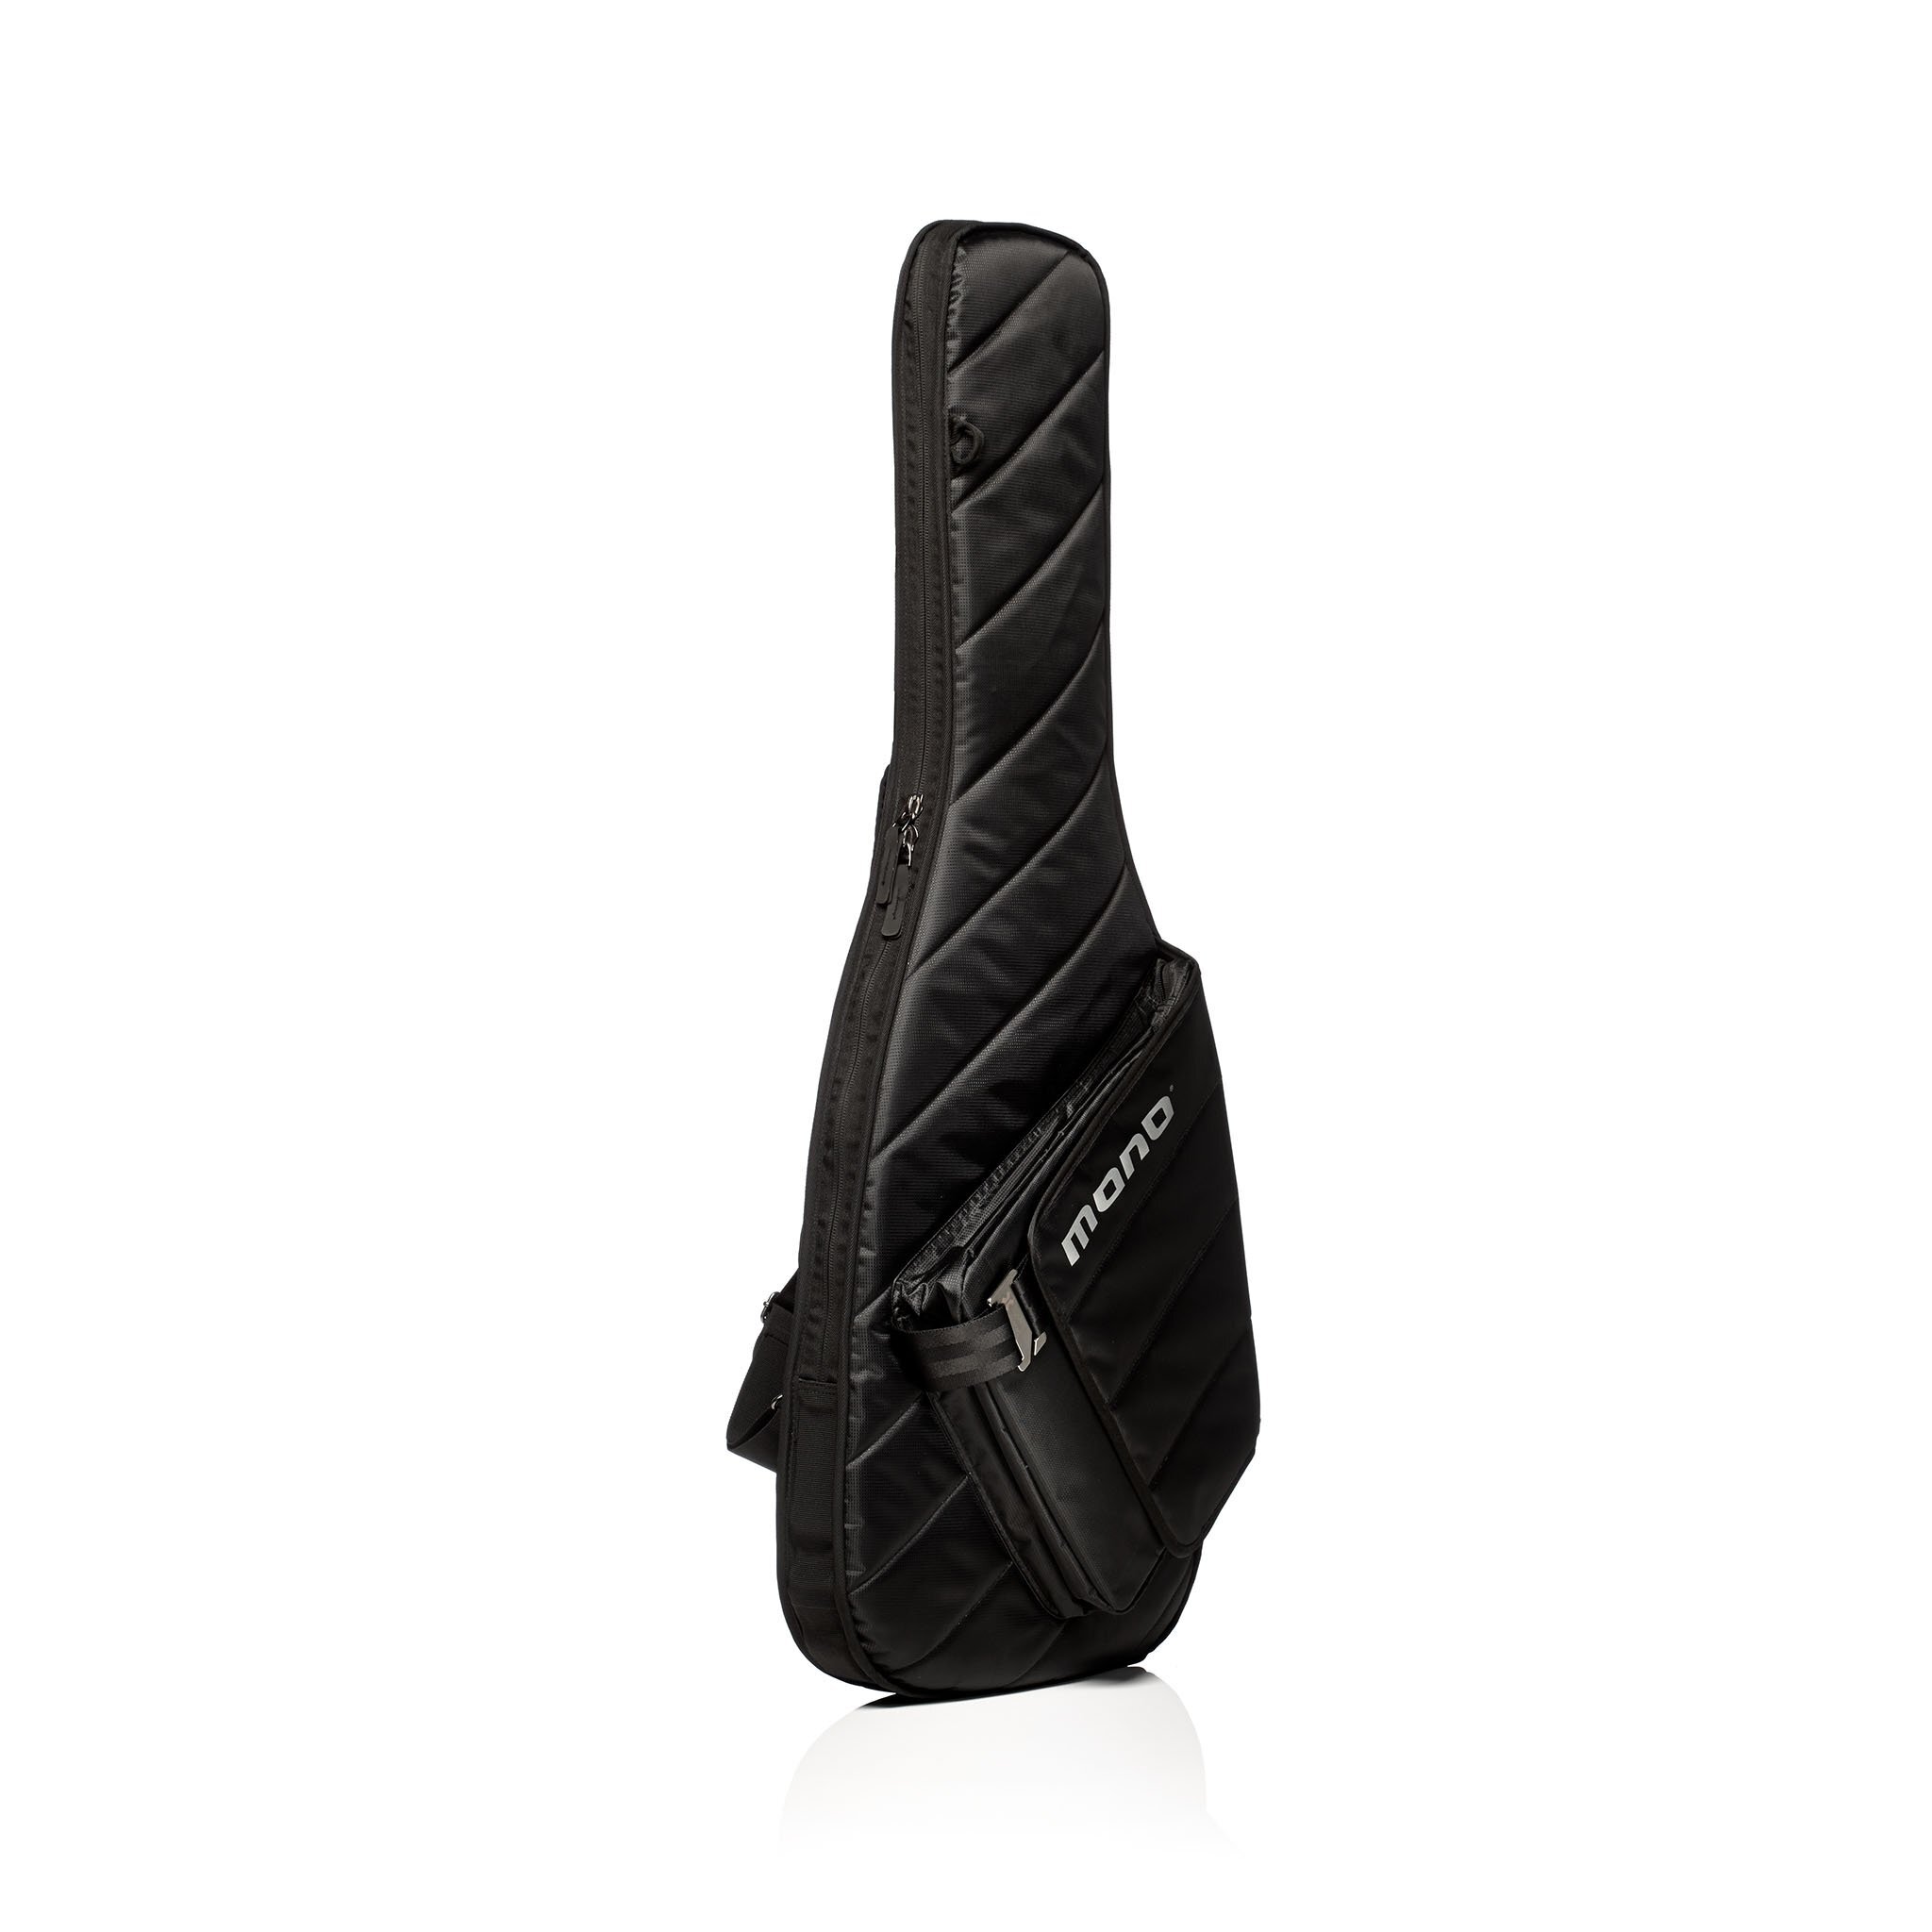 Mono Guitar Case- From $229.99